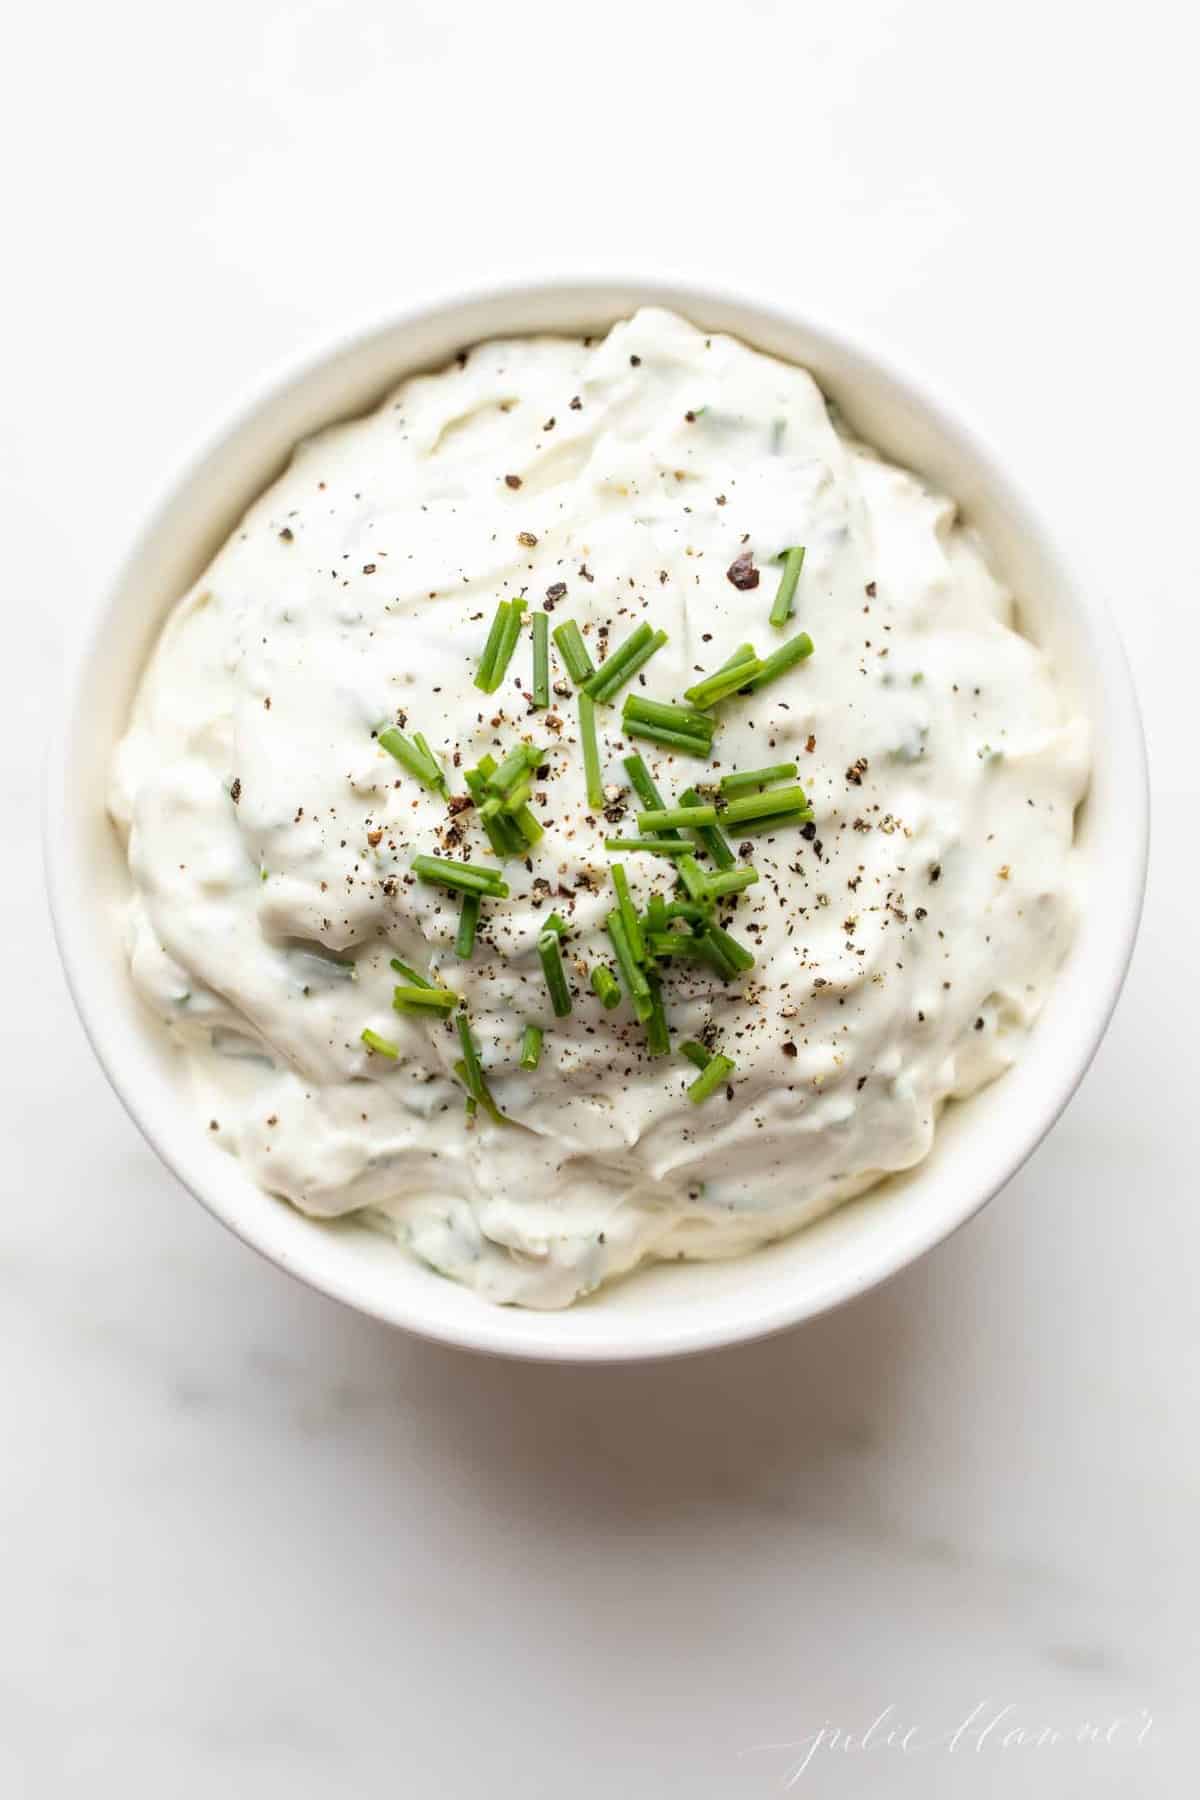 close up of blue cheese dip garnished with chives